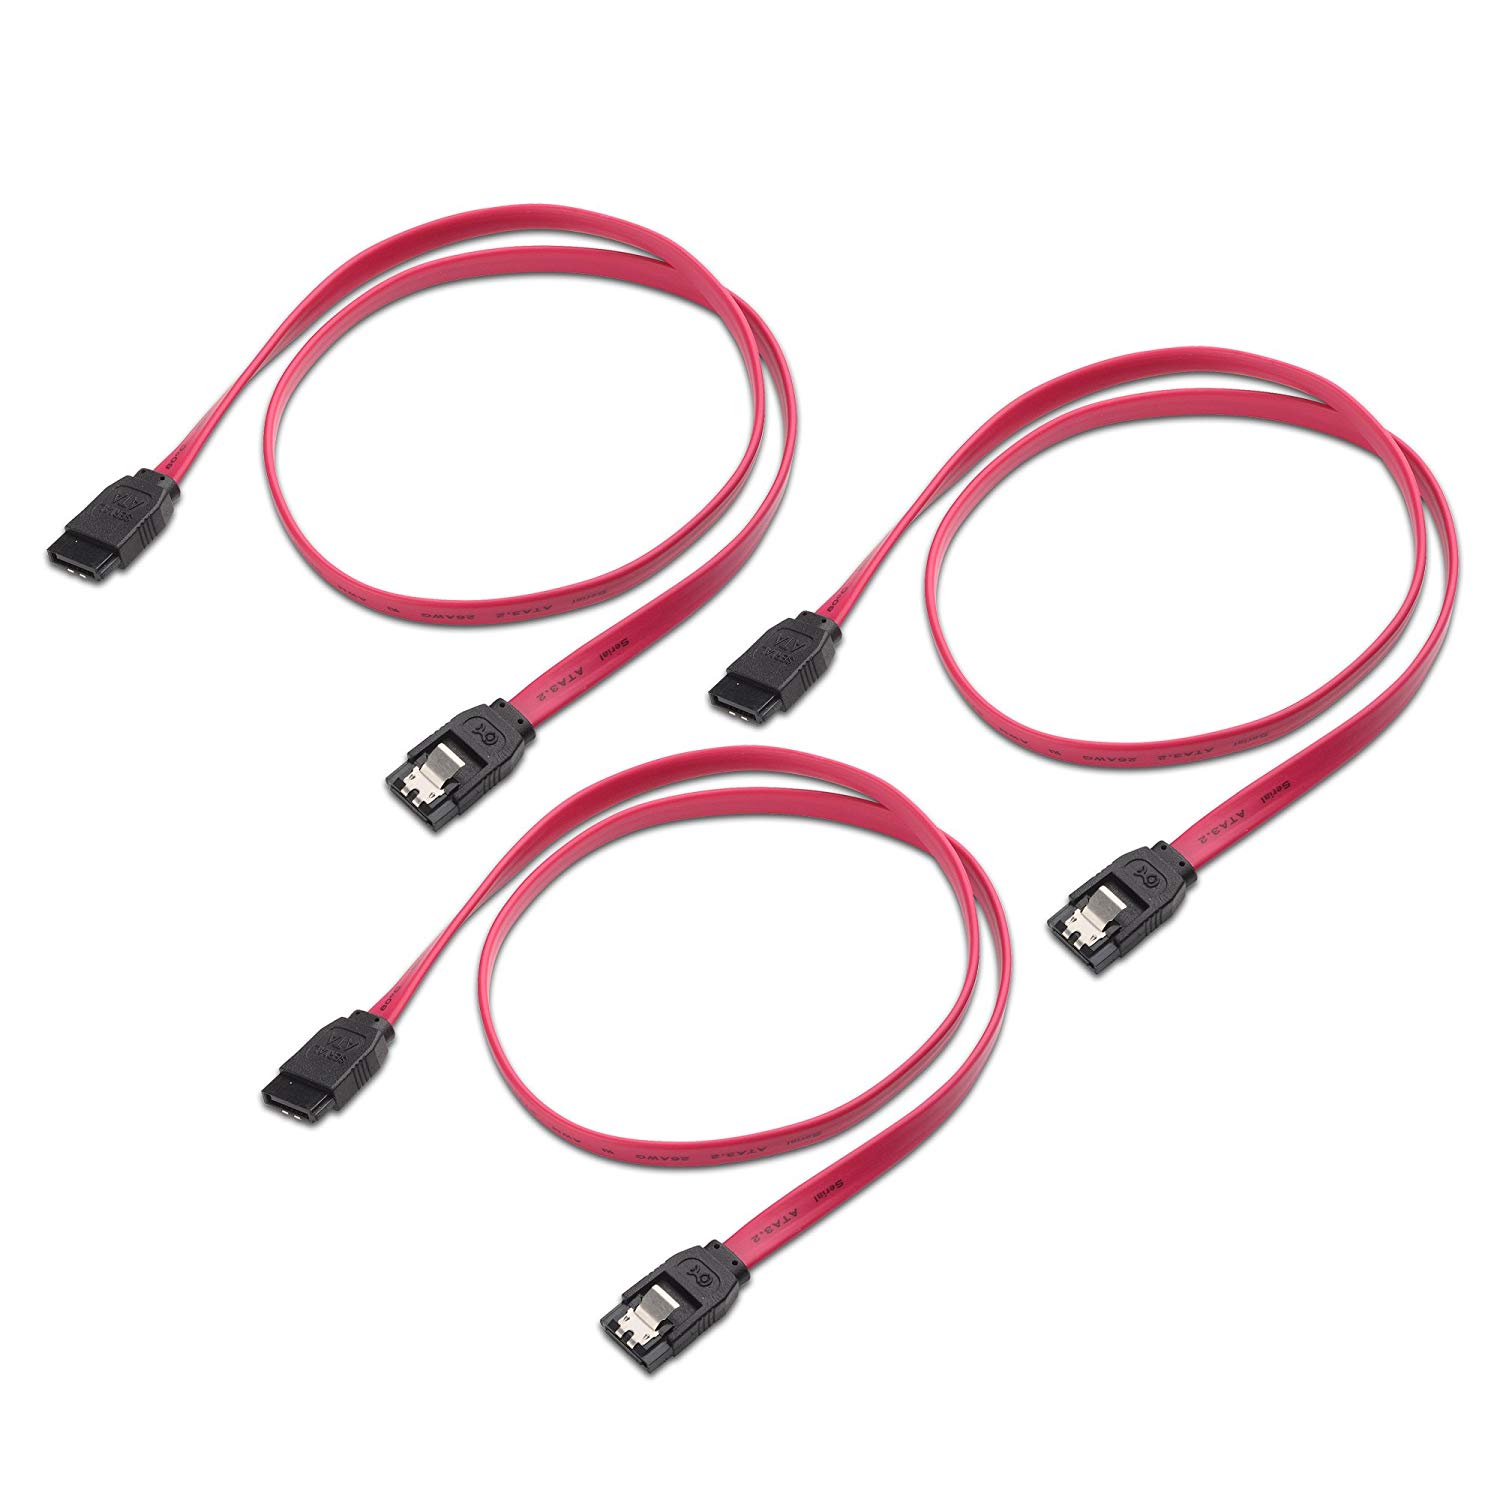 Cable Matters 3-Pack Straight SATA III 6.0 Gbps SATA Cable